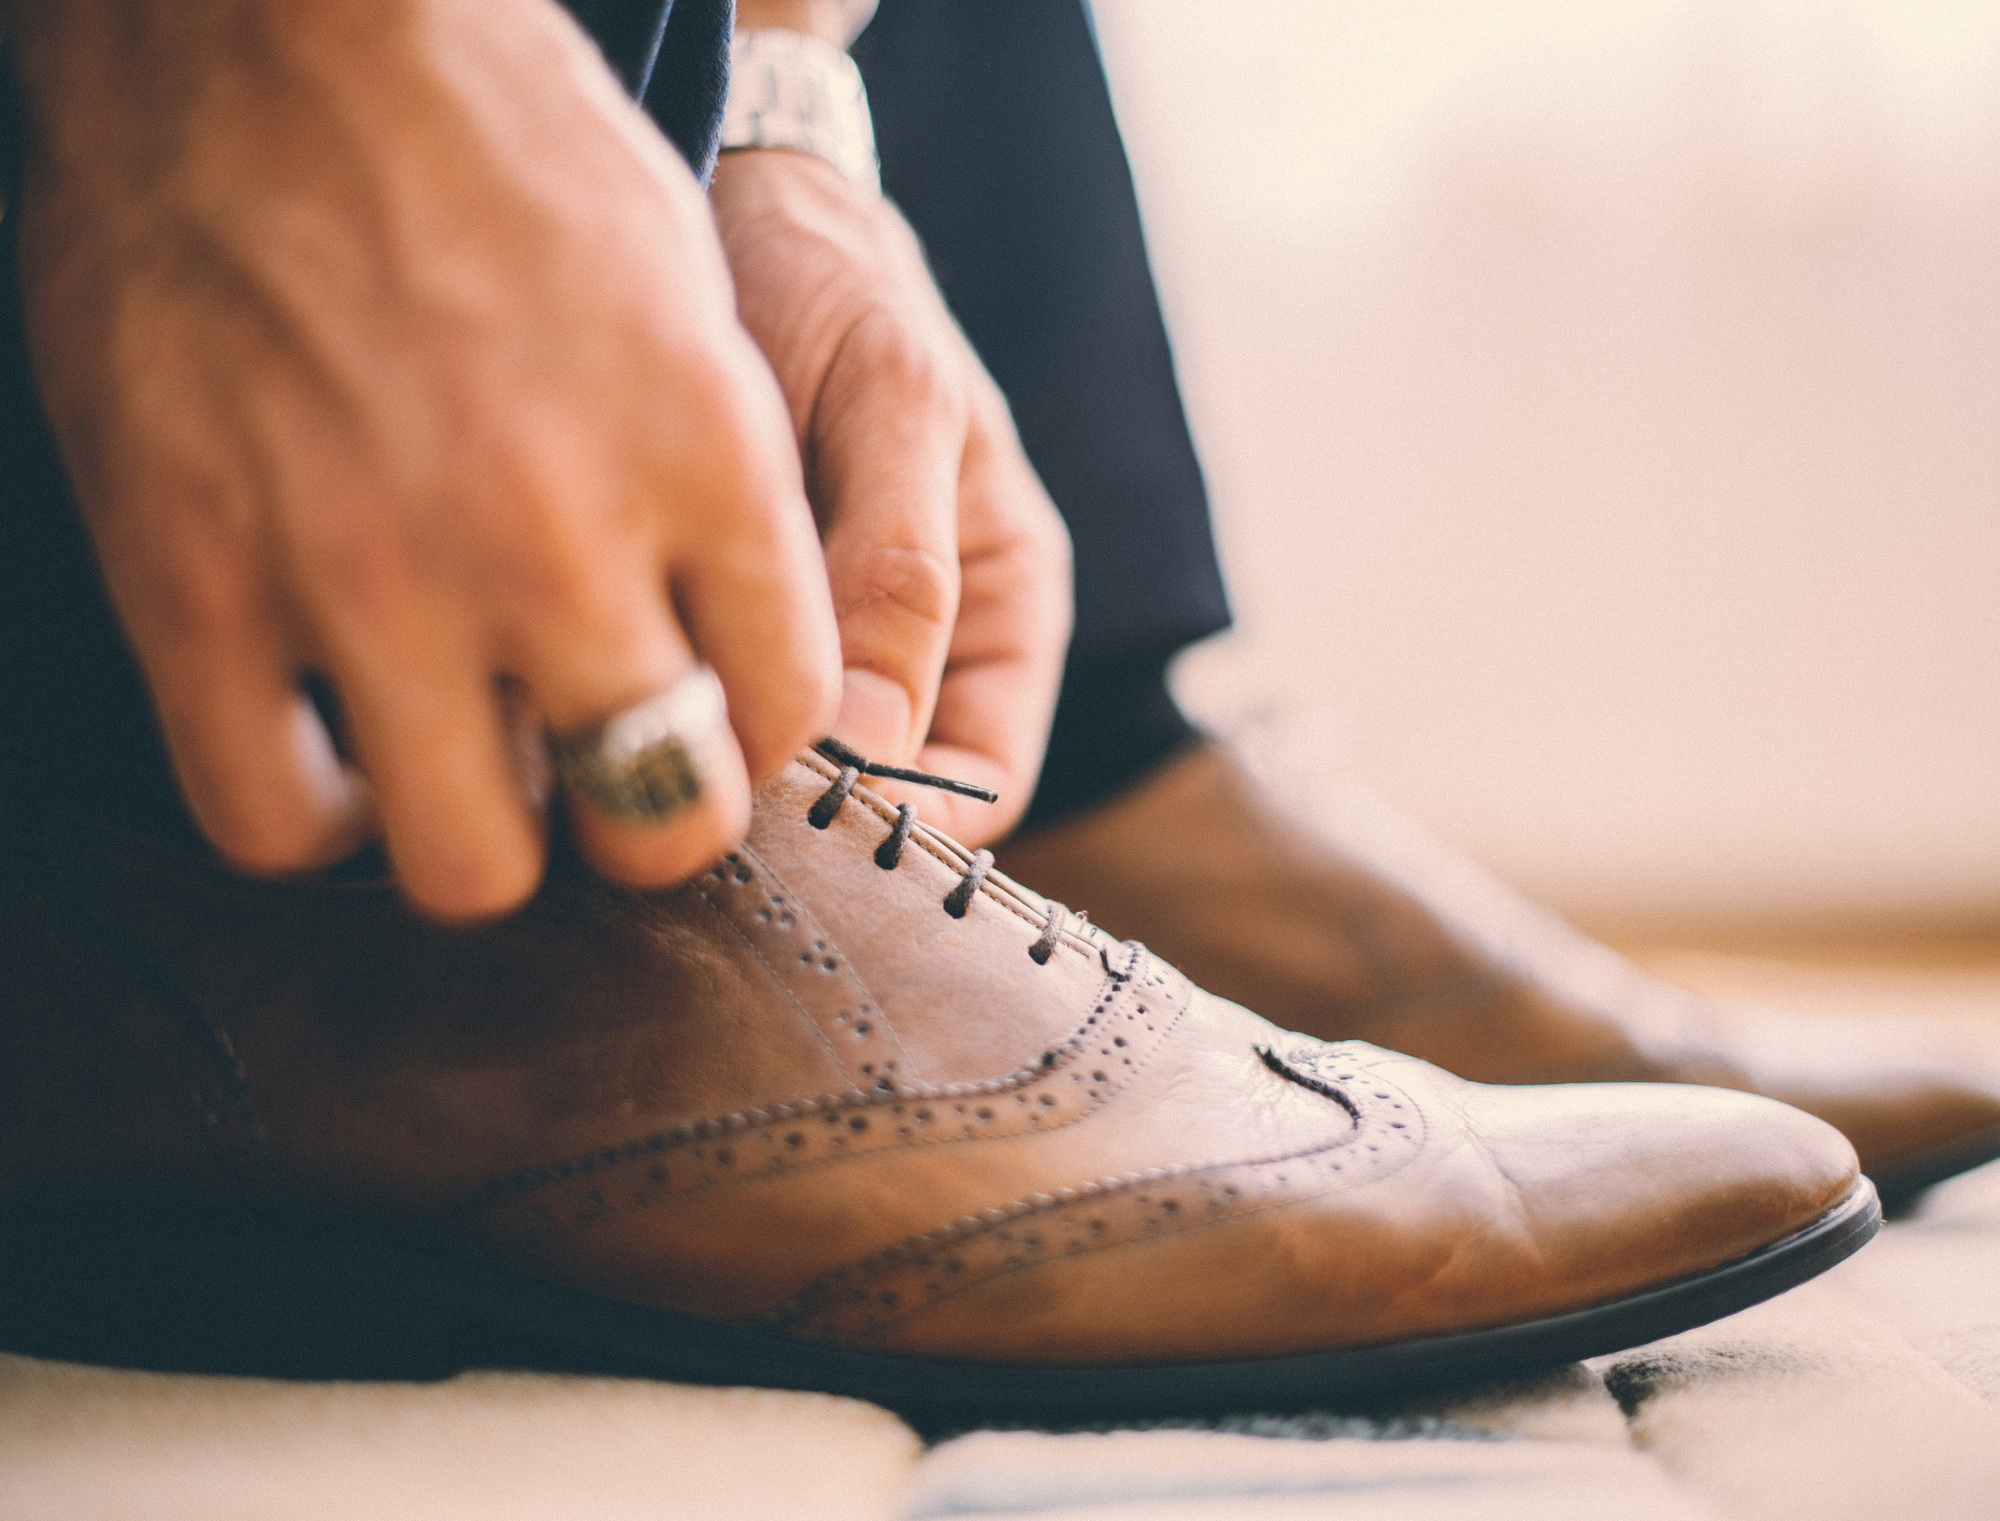 How To Start An Online Shoe Business for Men